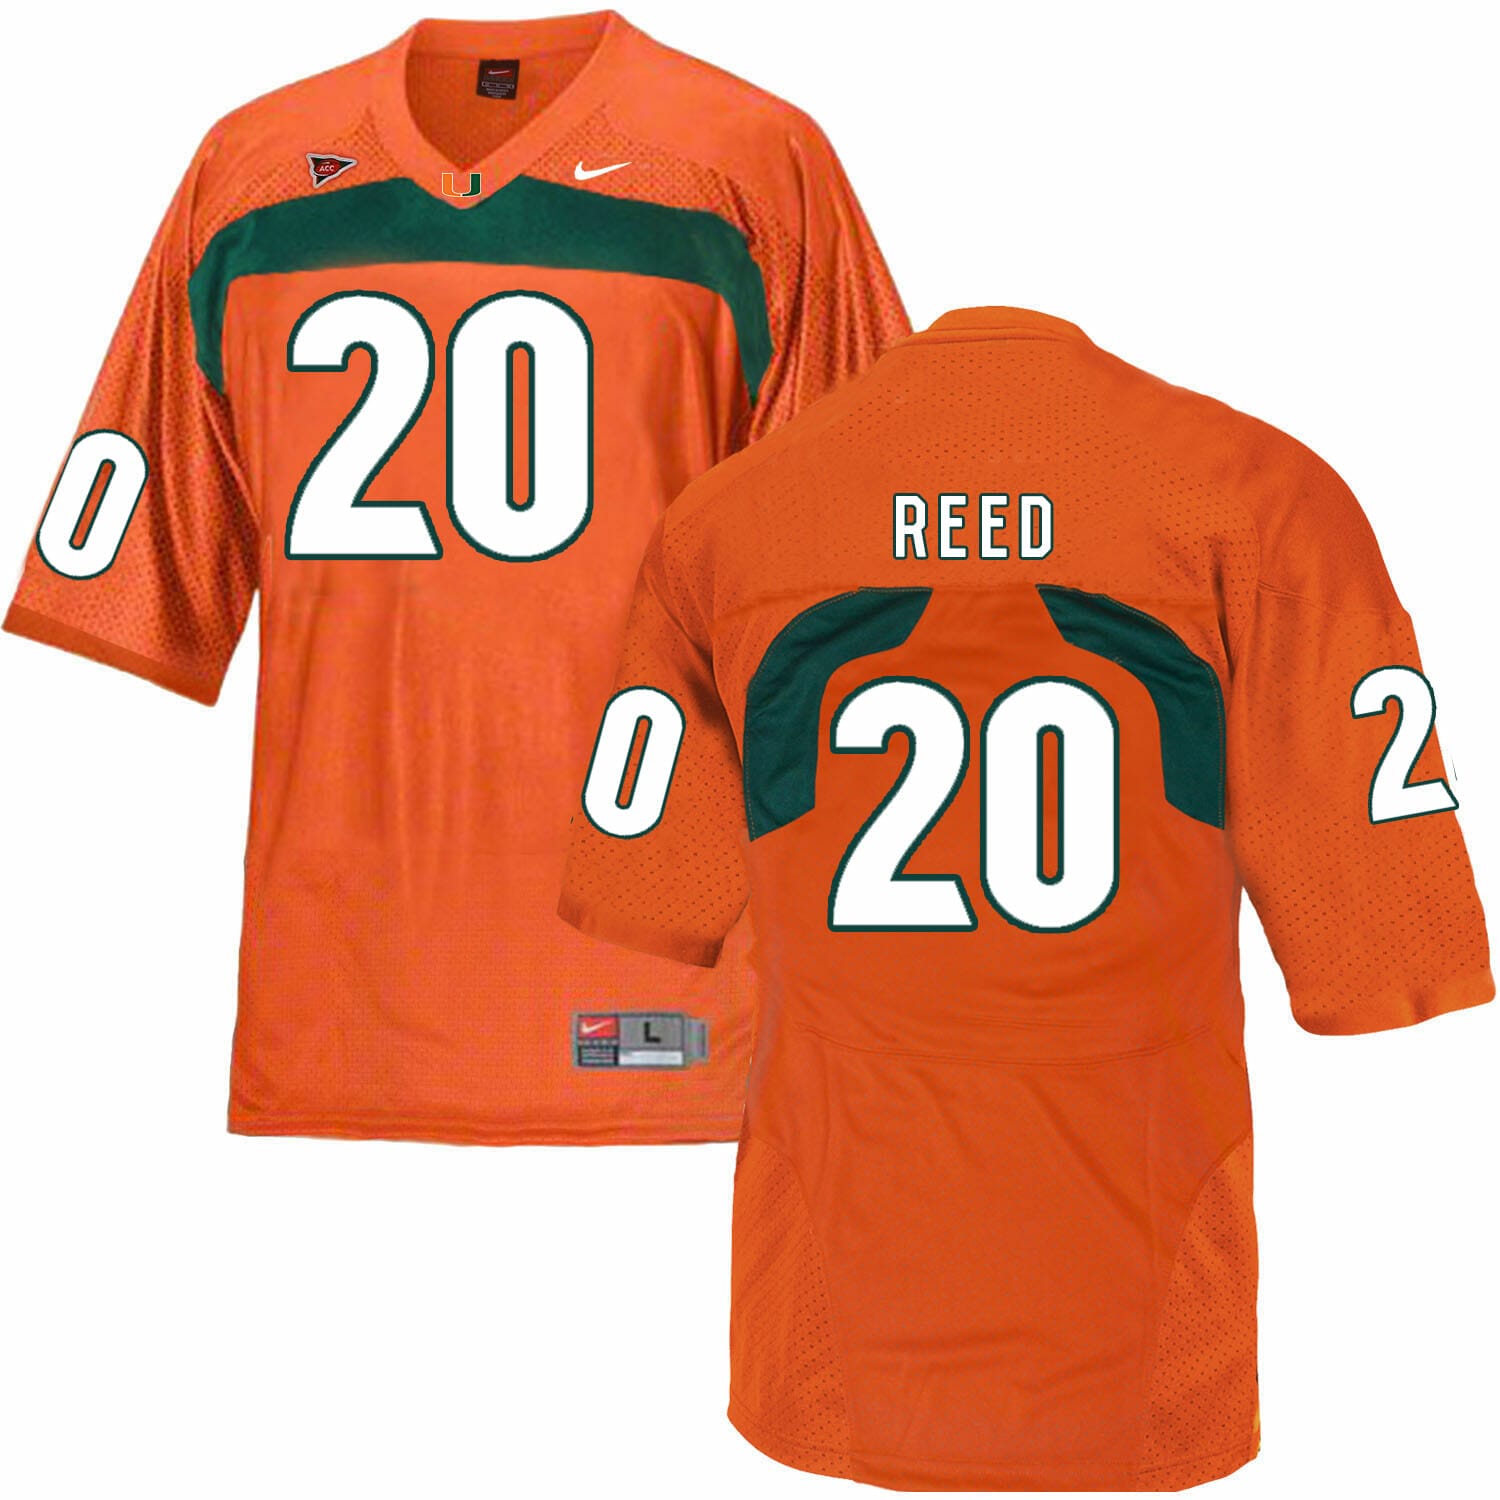 ed reed jersey